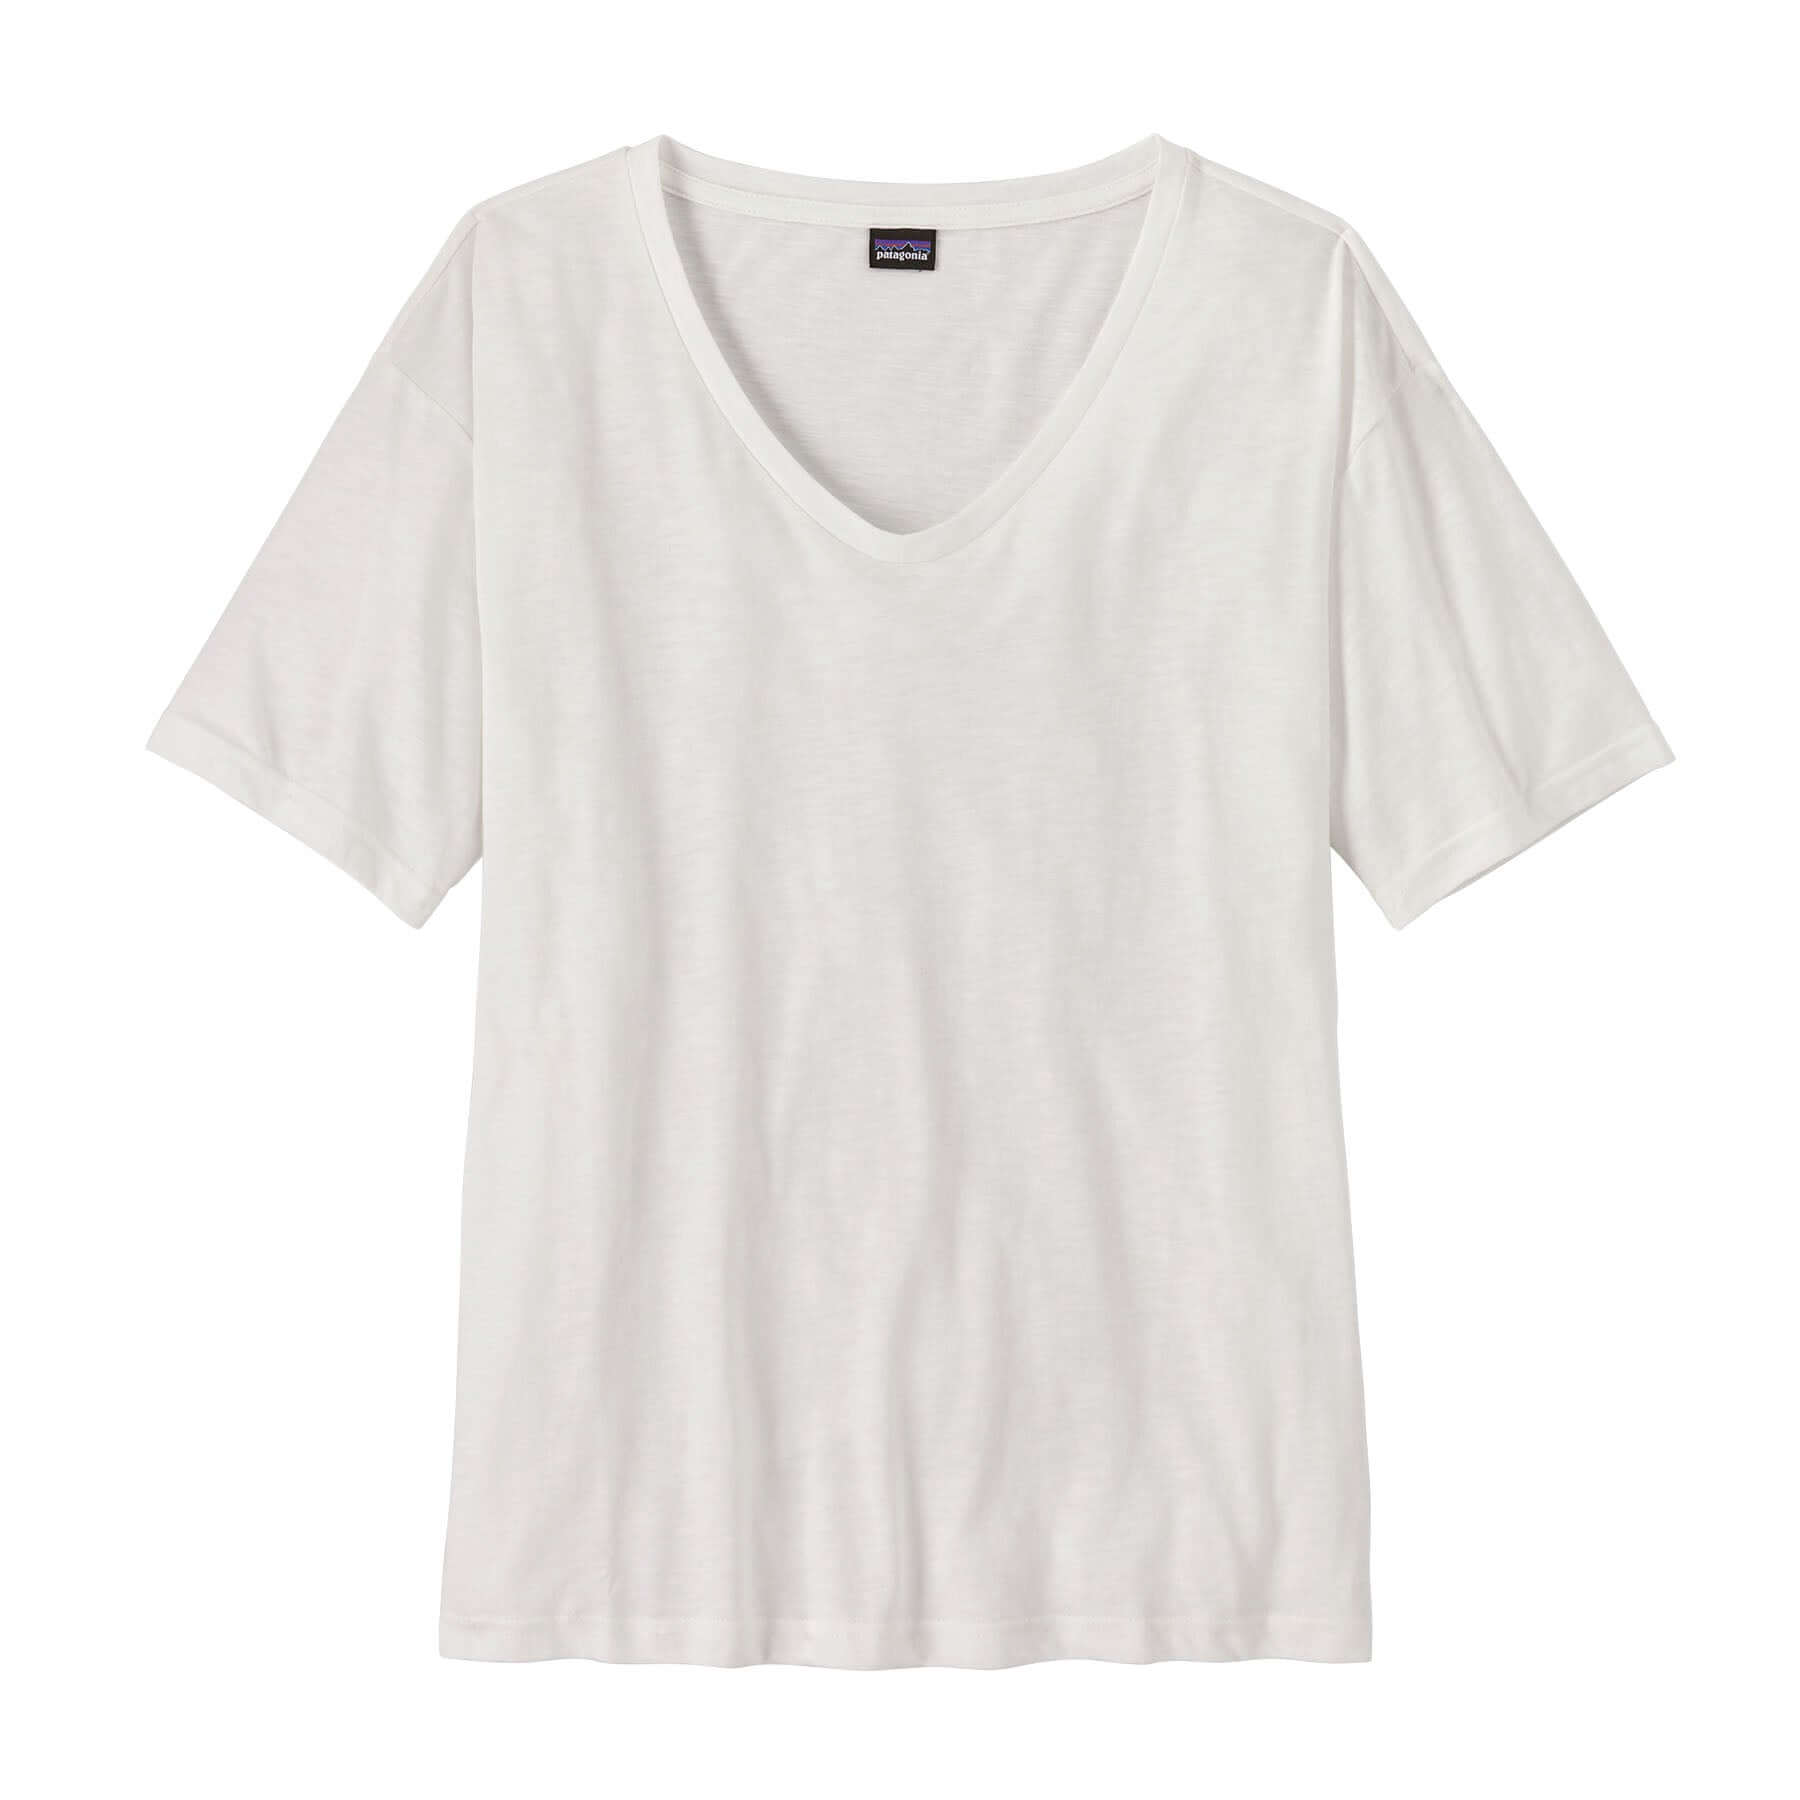 Women's Short Sleeve Mainstay Top in WHITE | Patagonia Bend